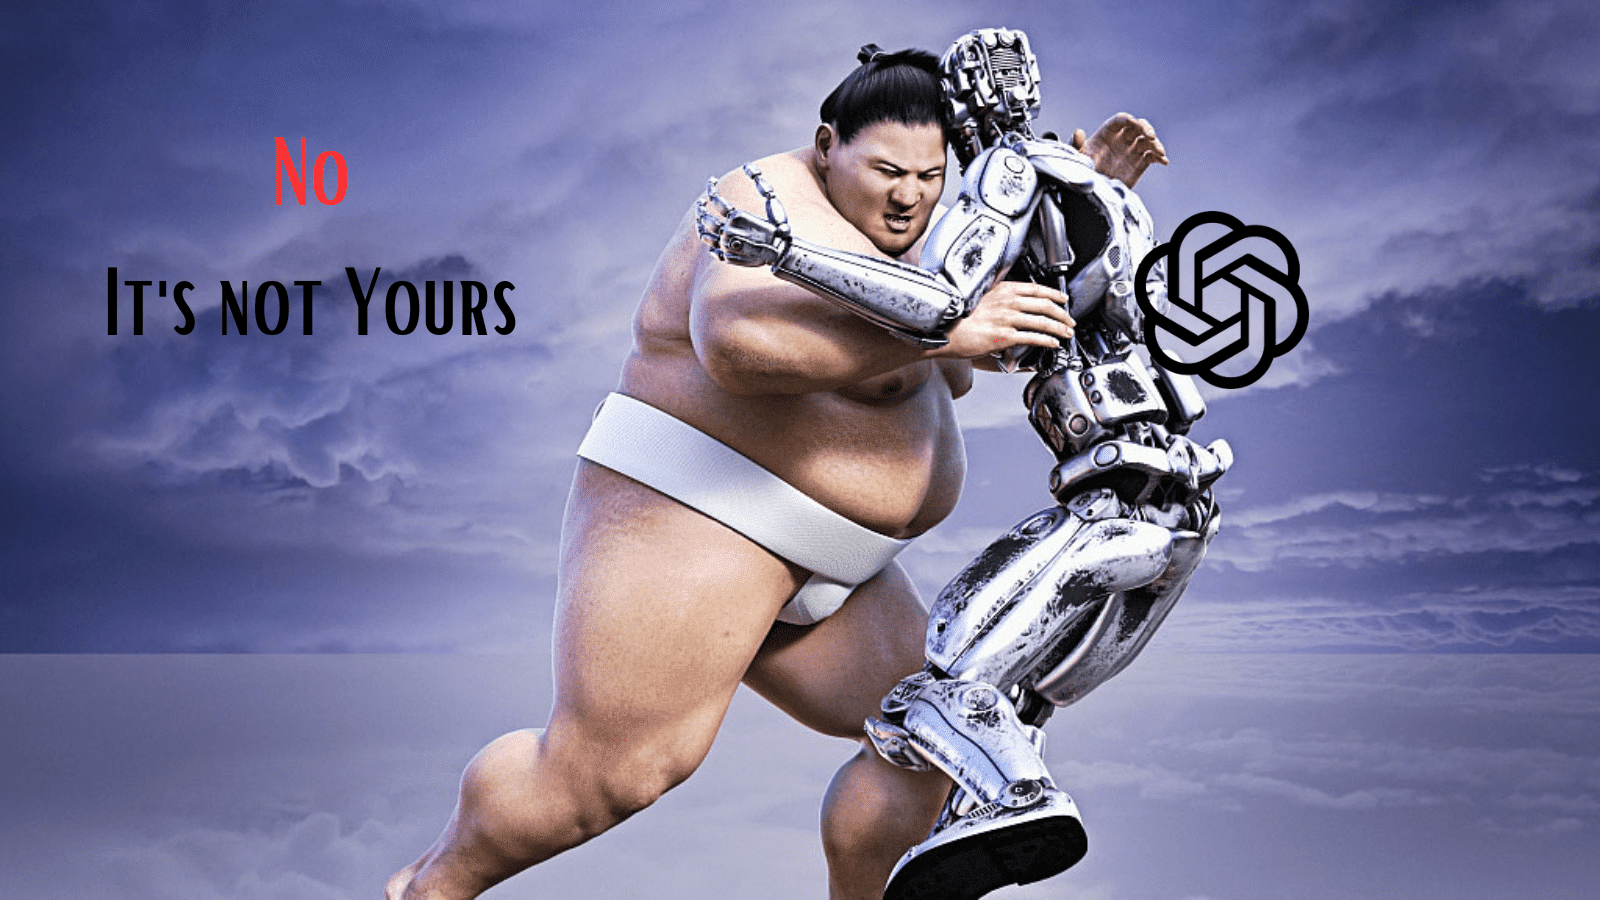 A sumo wrestling human physically defeating a robot and saying 'my job is not yours'